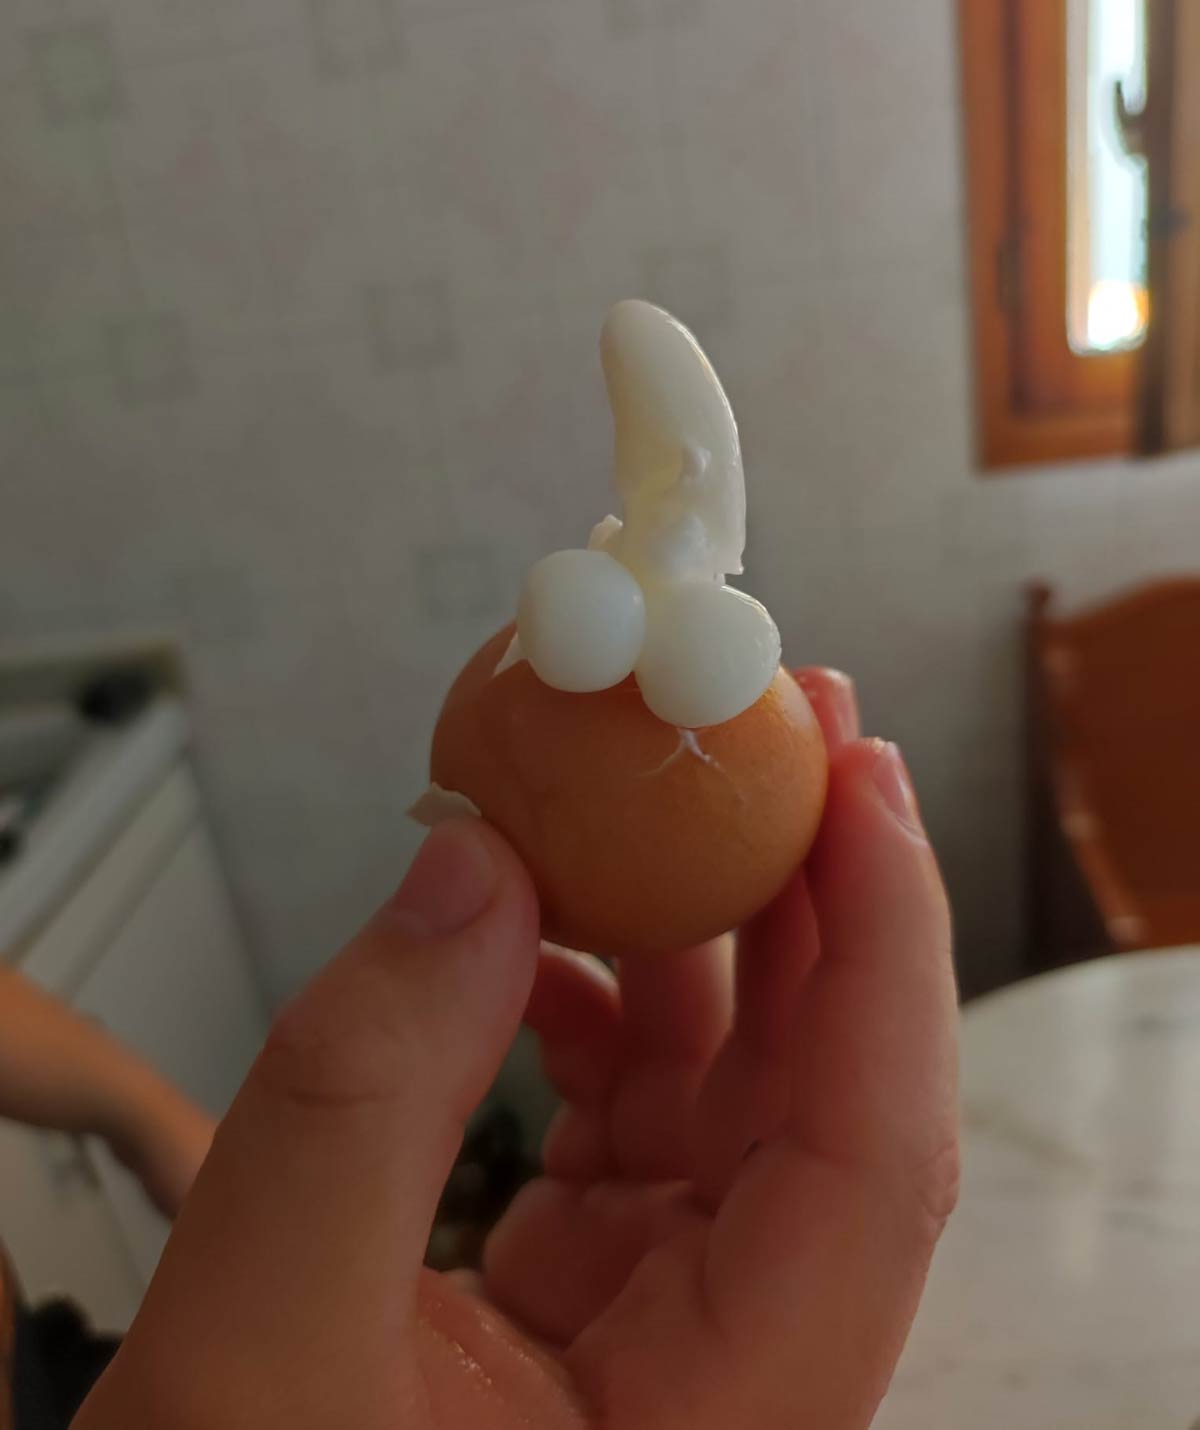 I just wanted to eat a normal egg...